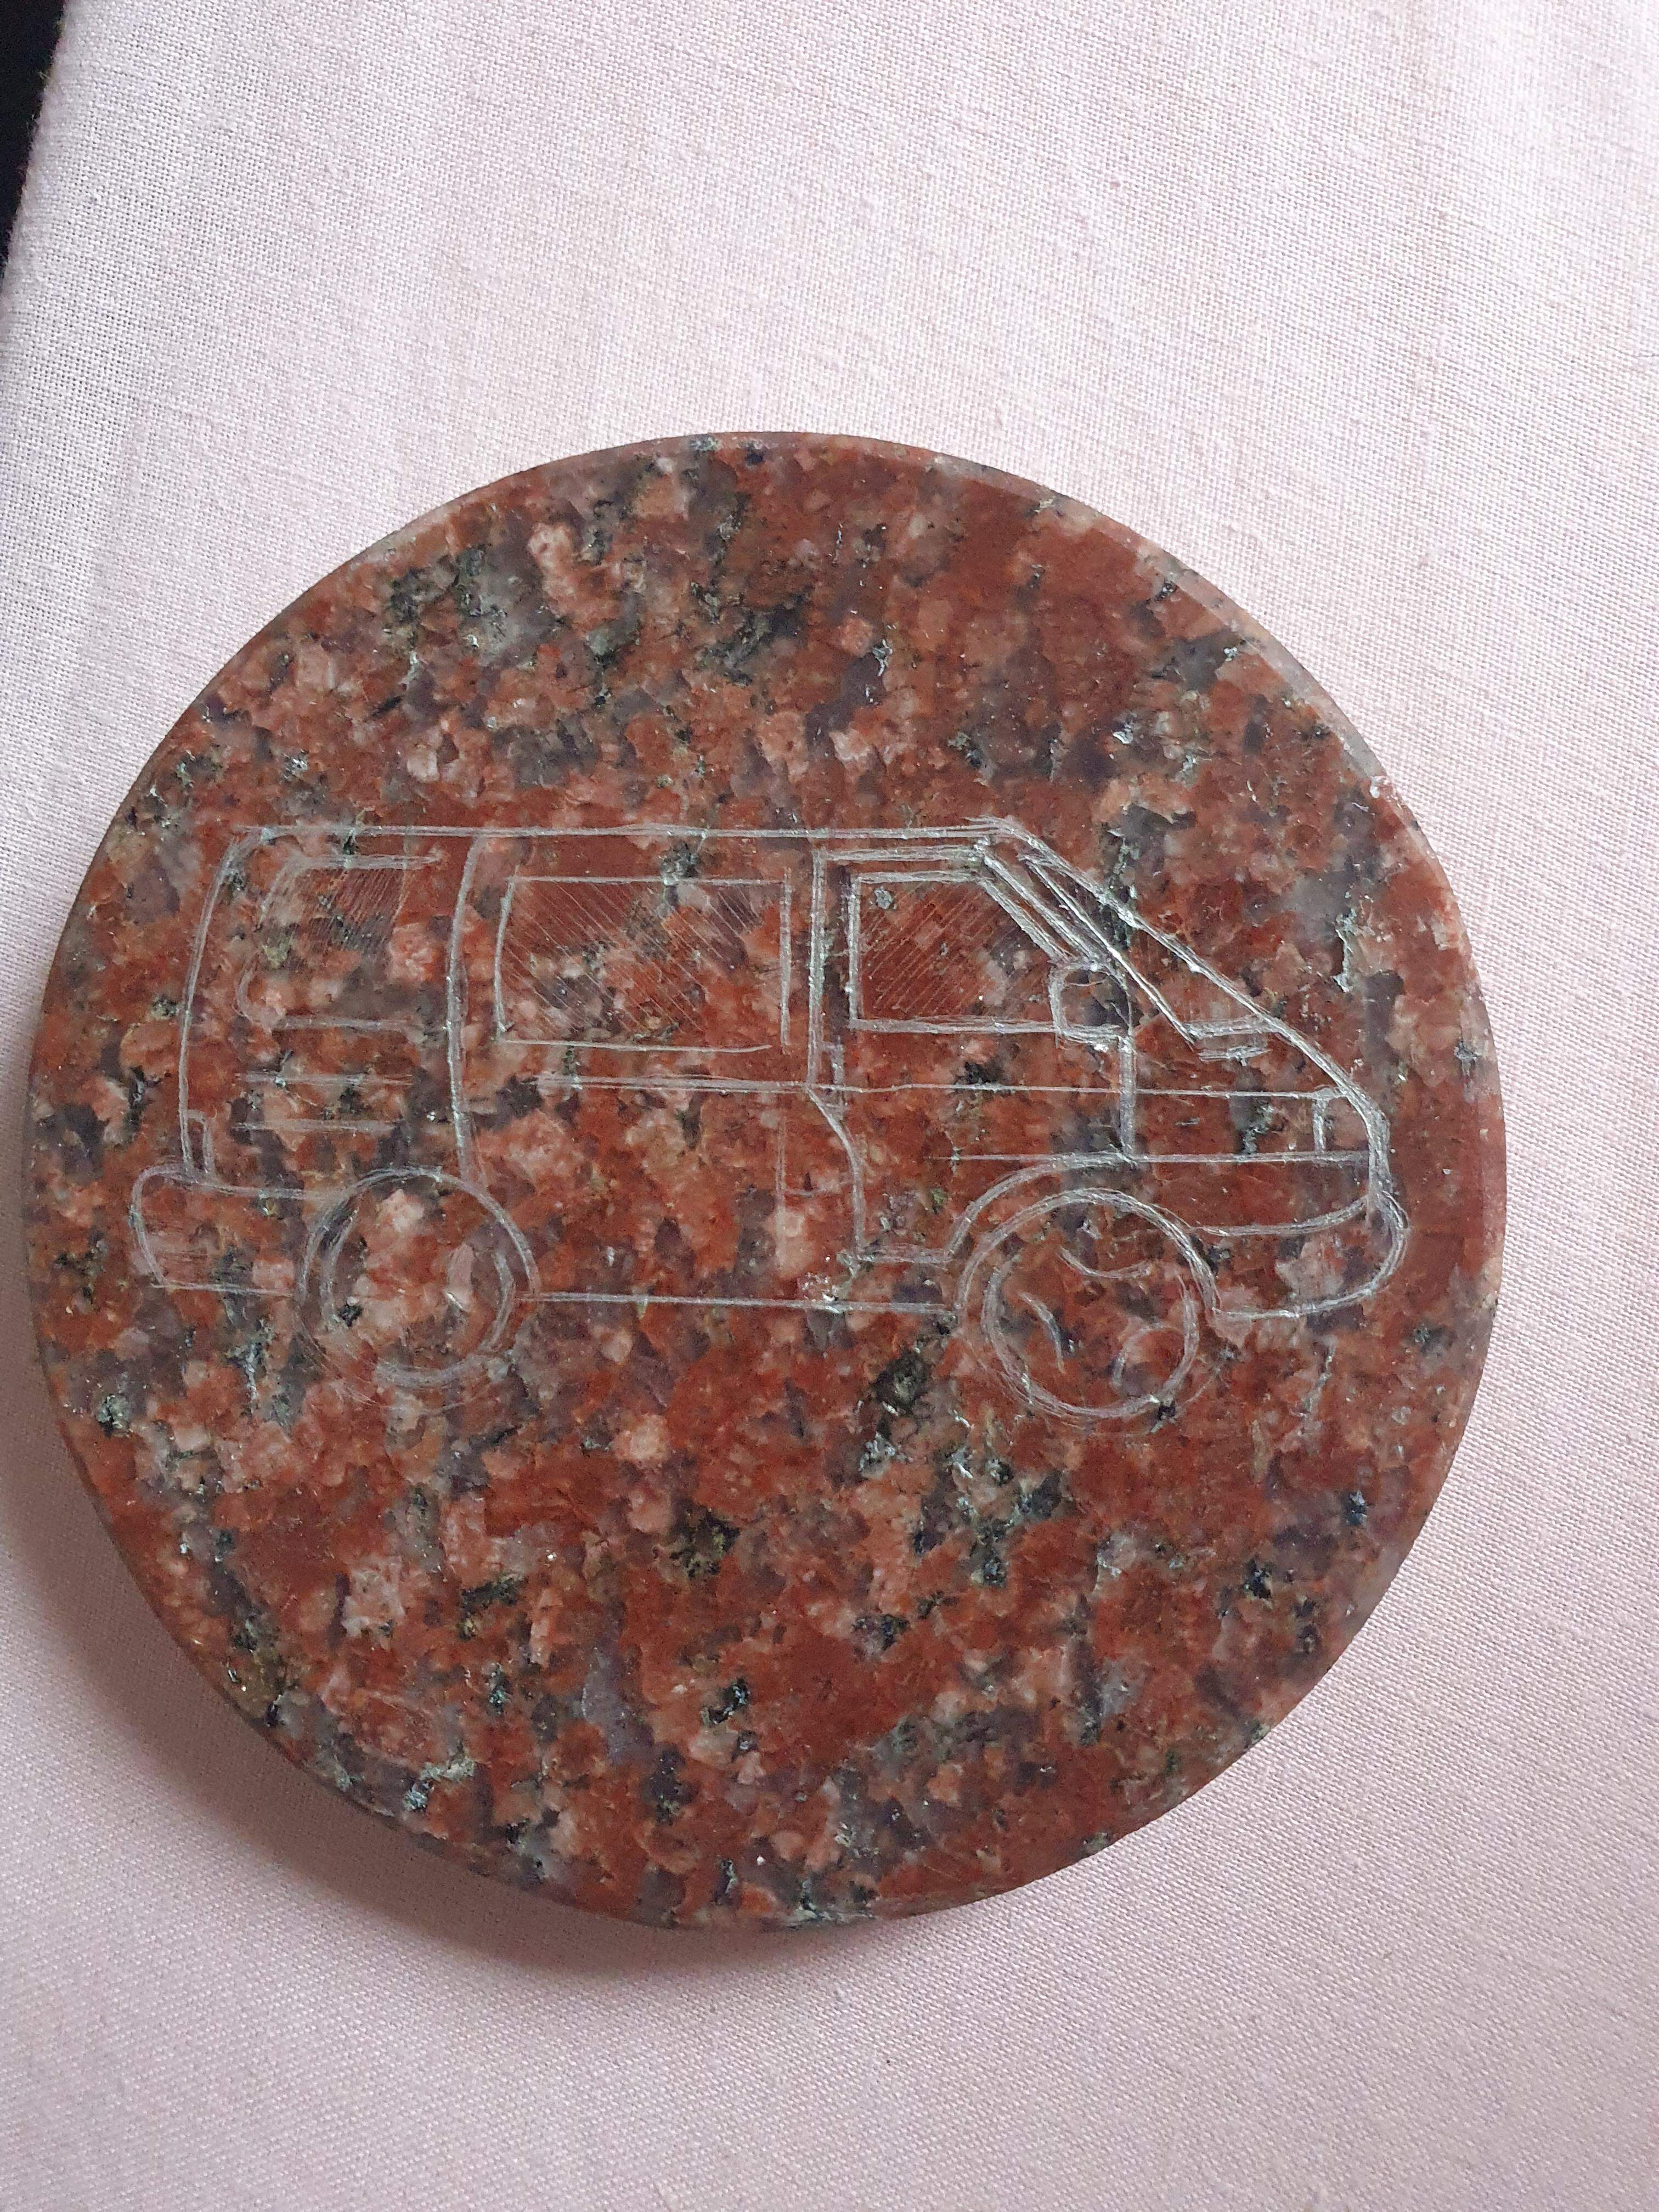 A Coaster with a VW Camper van on it.